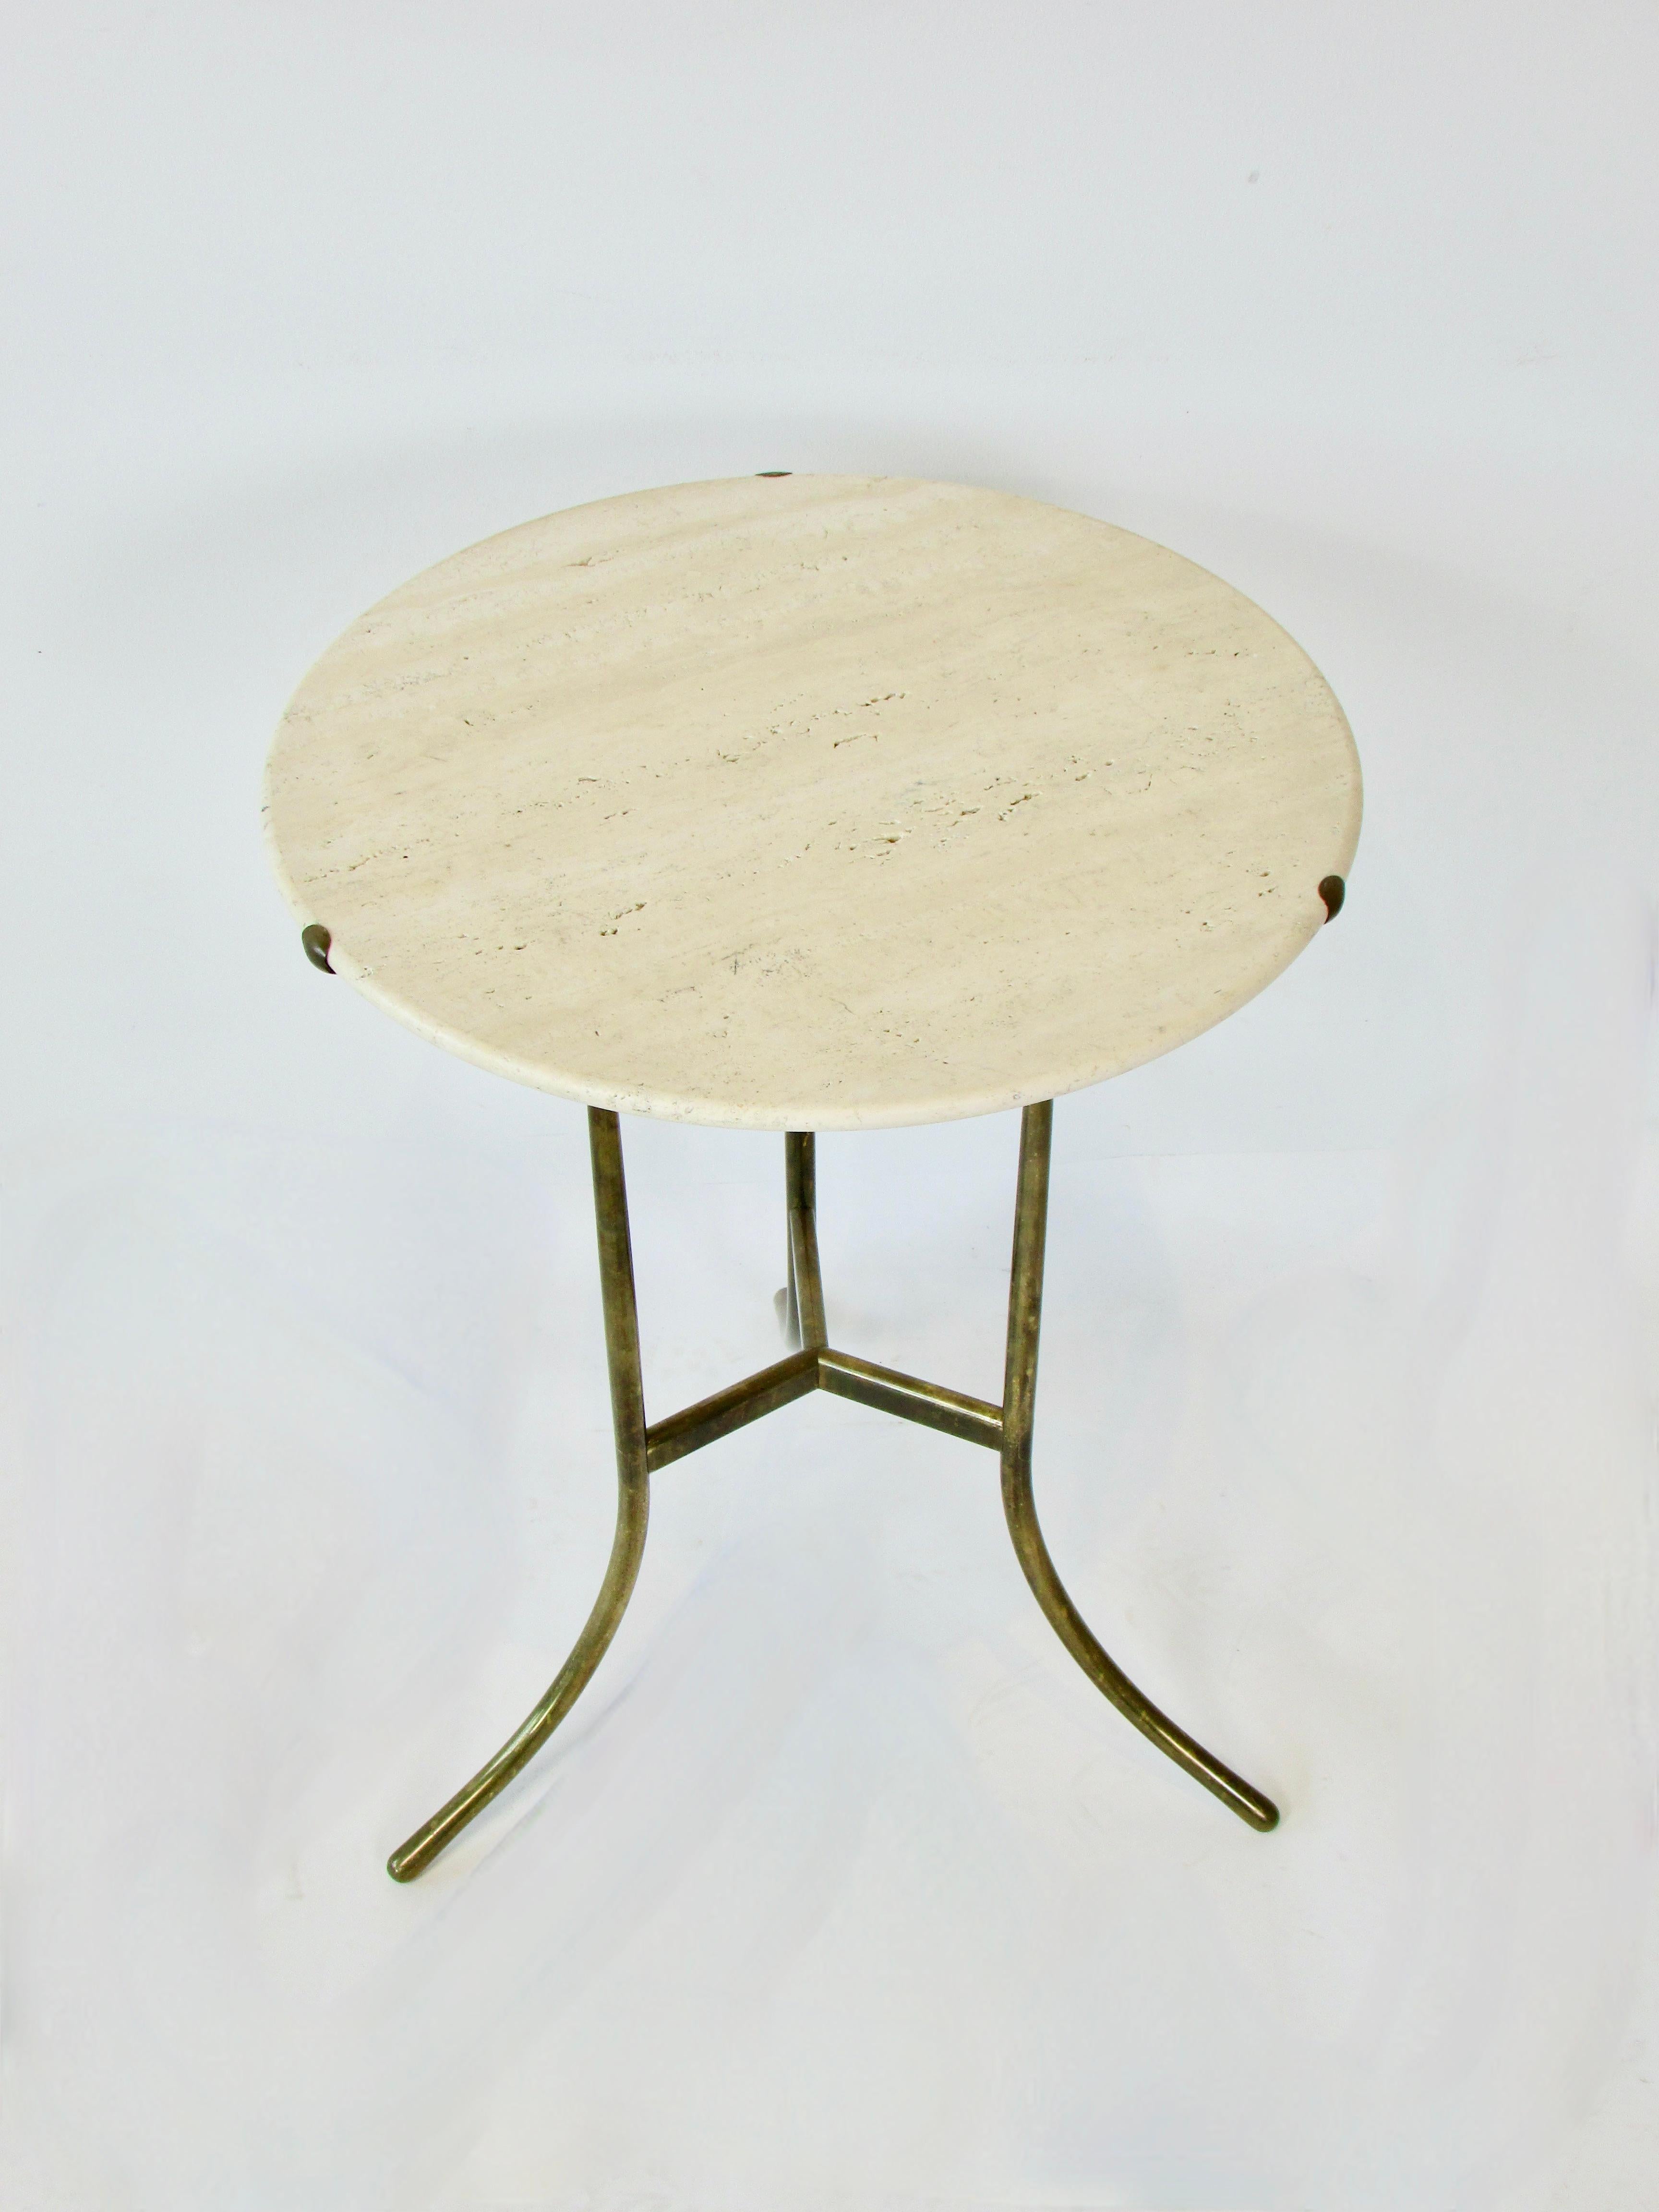 Cedric Hartman Travertine Top AE Side Table on Brass Base   In Good Condition For Sale In Ferndale, MI